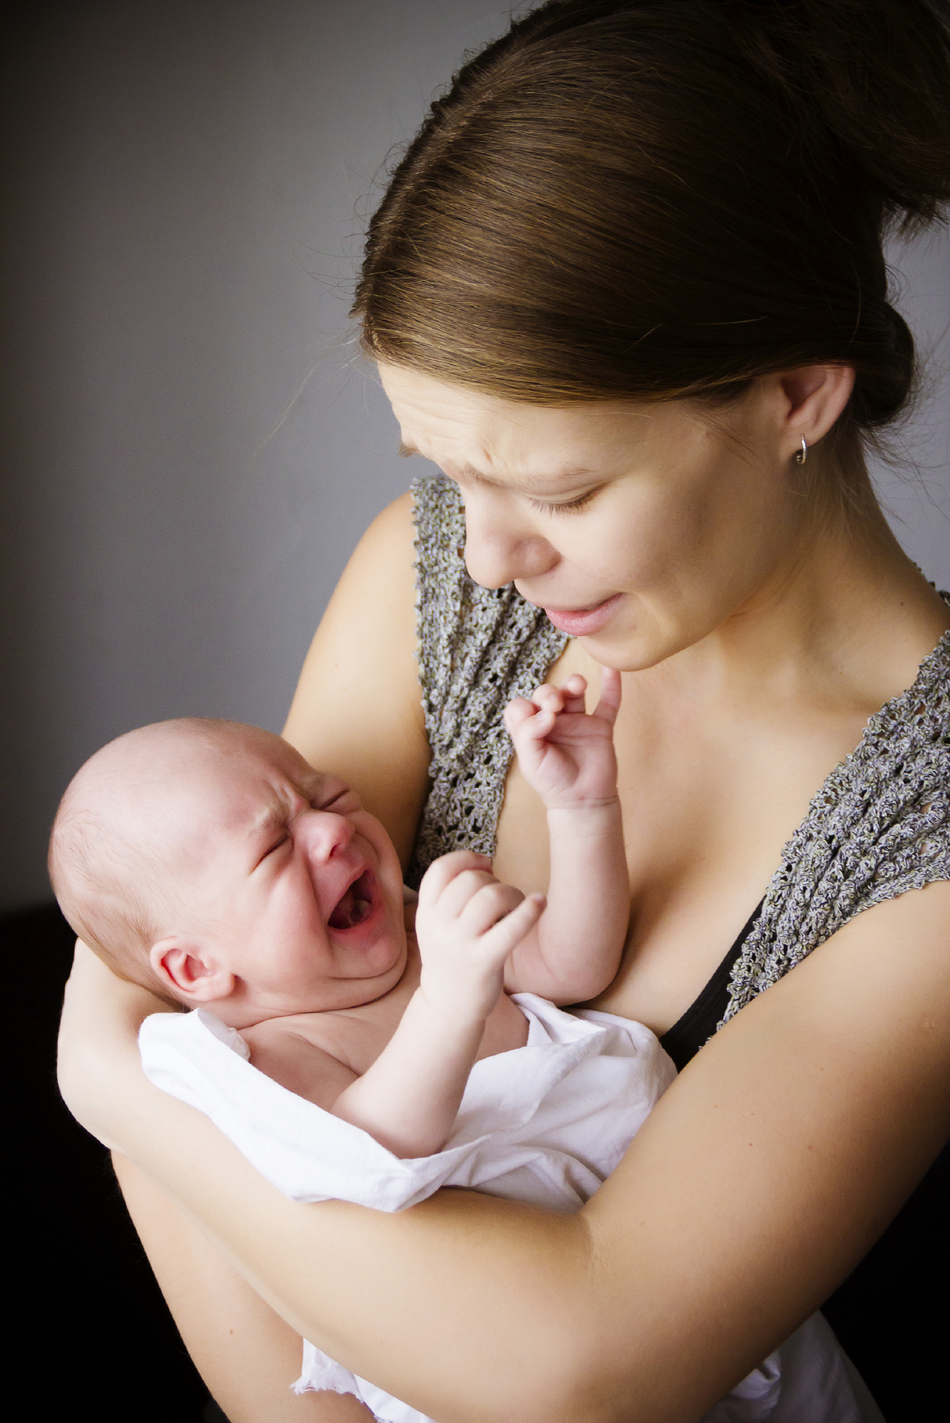 You Don’t Have to Feel Overwhelmed with Your First Newborn